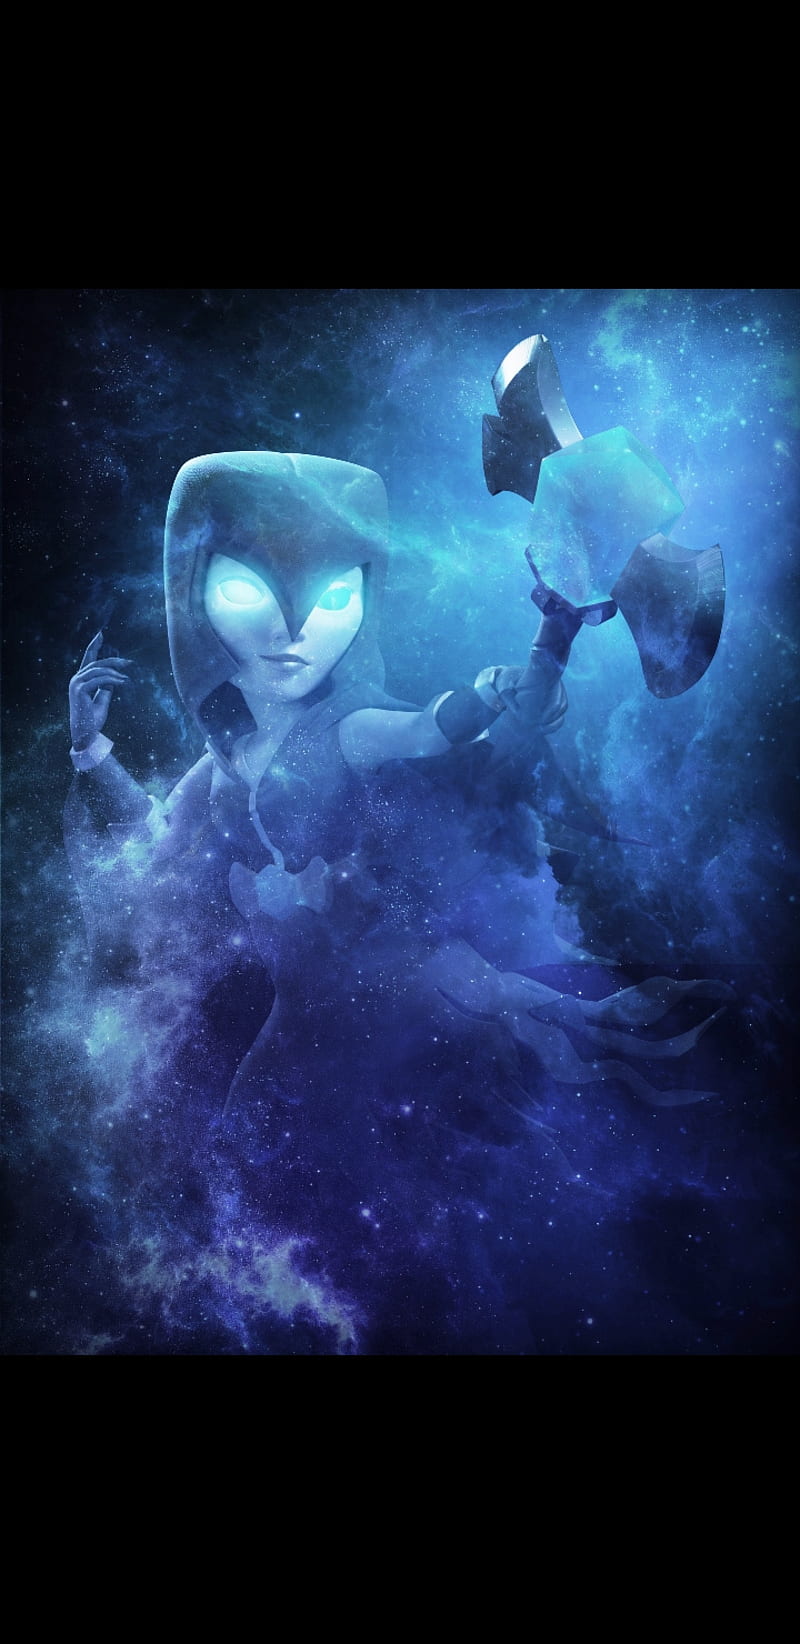 Night witch, background, clash royale, cosmic, sup erc ell, supercell, HD phone wallpaper